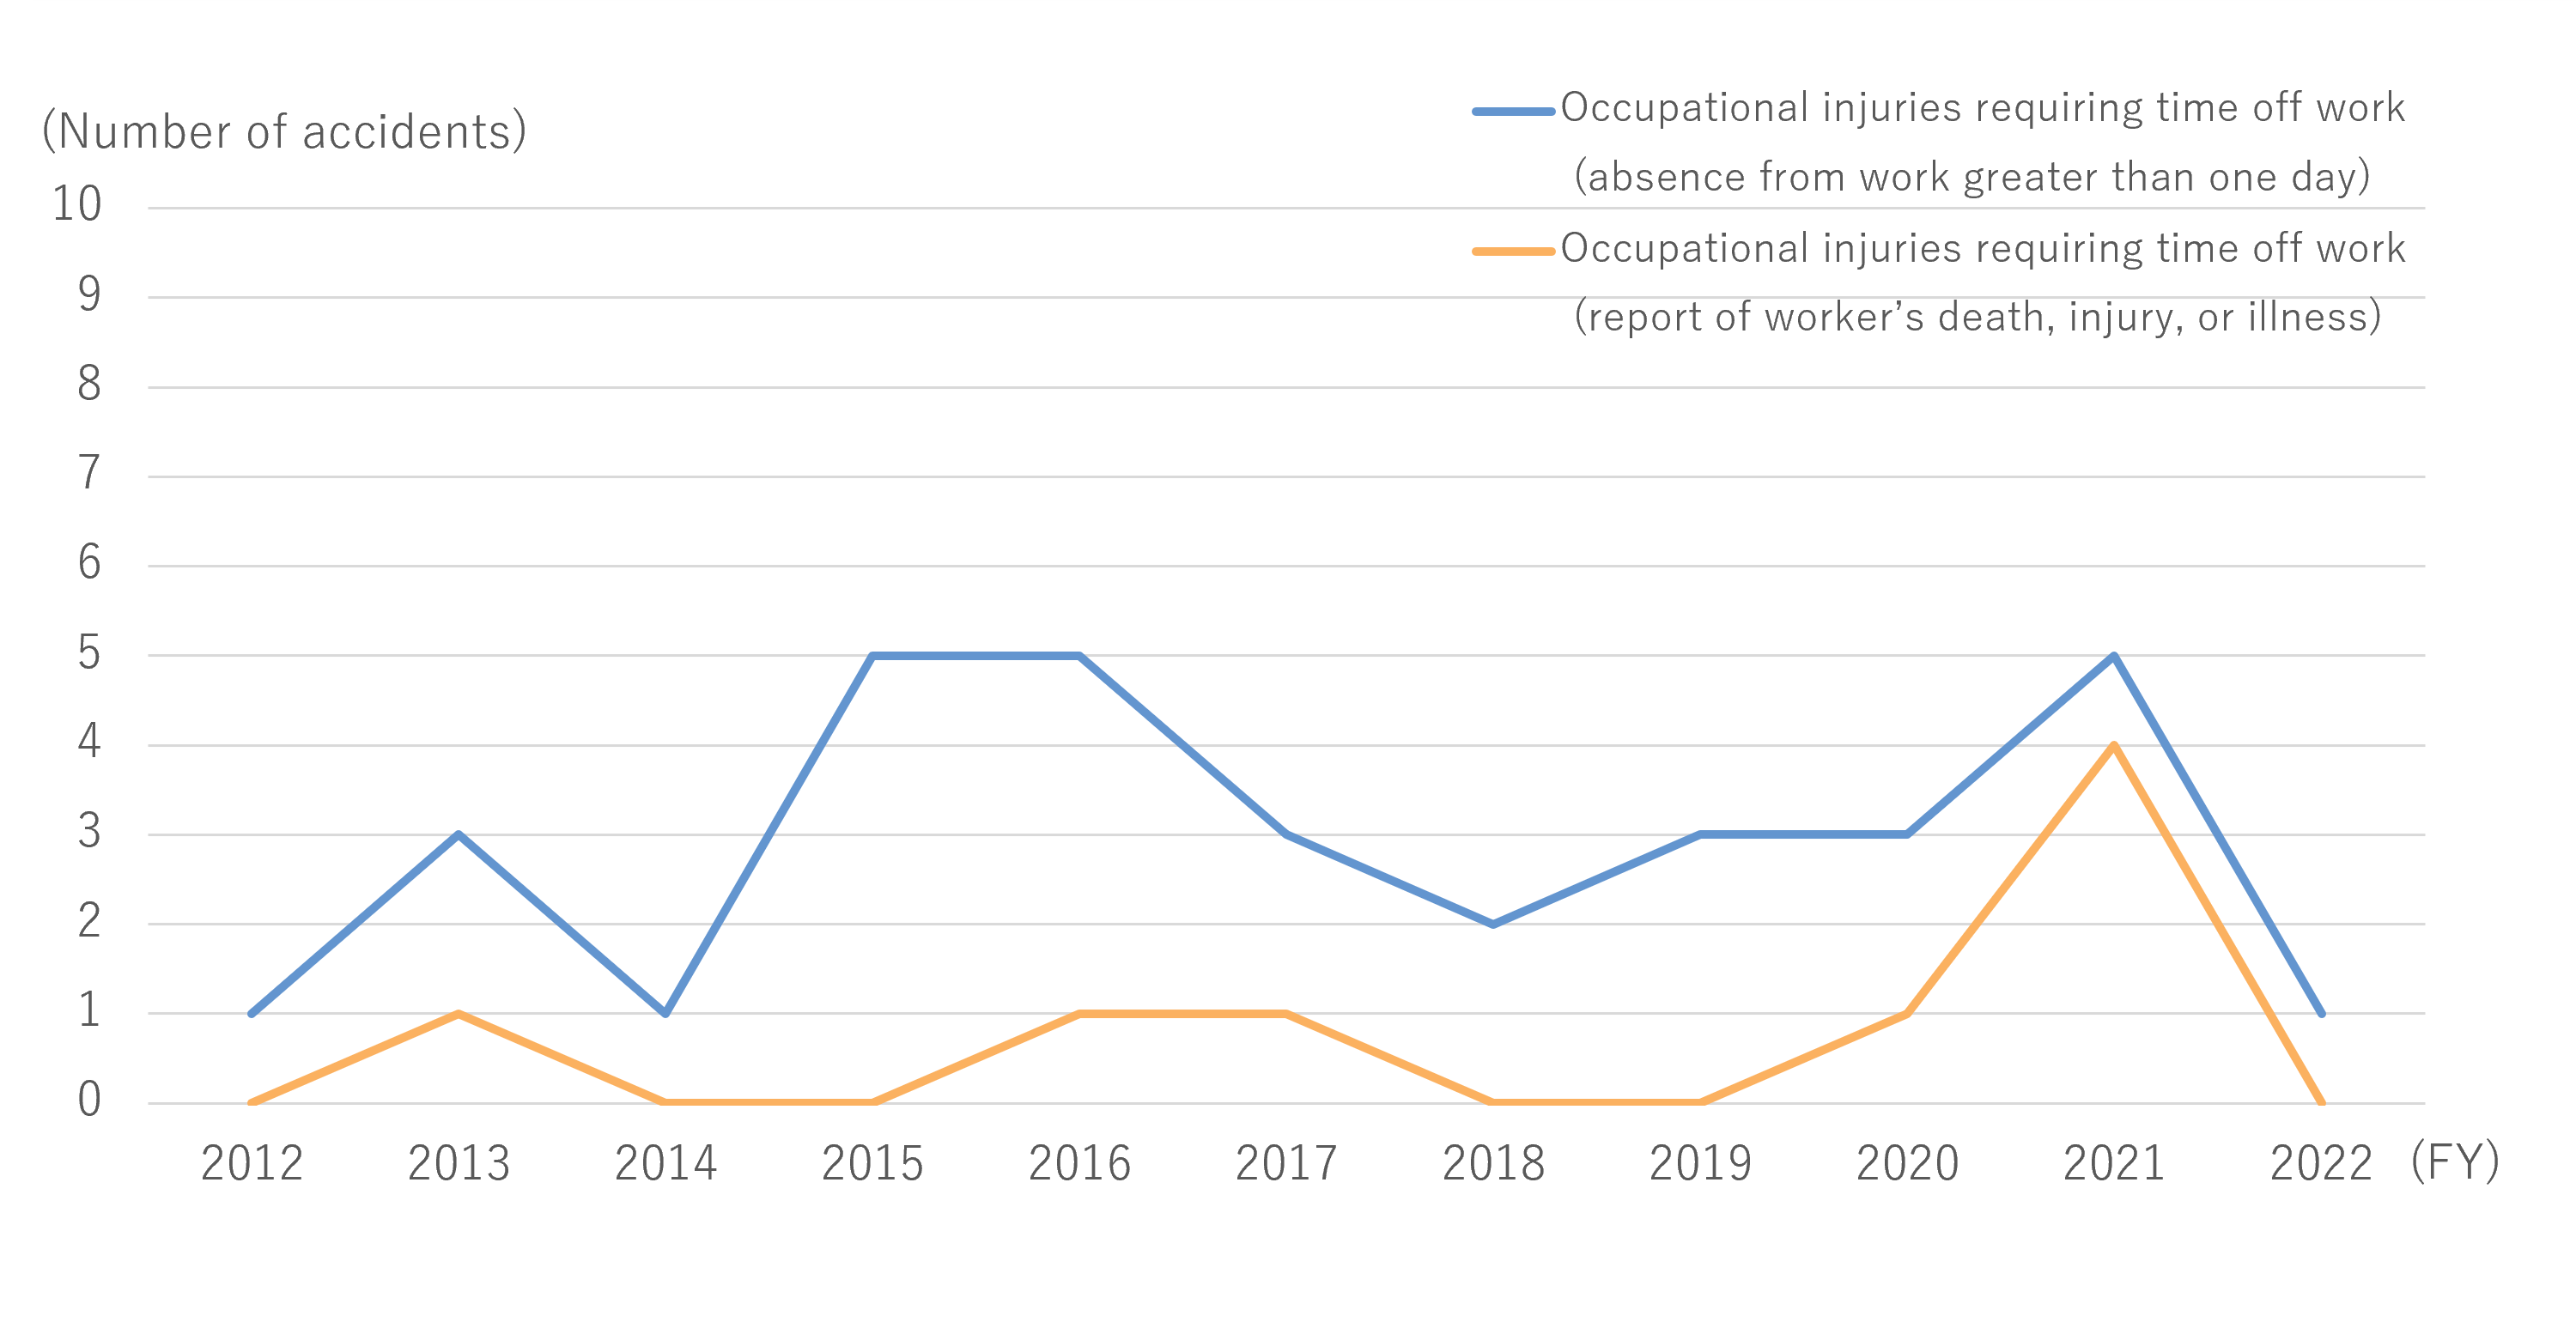 Occupational injuries requiring time off work